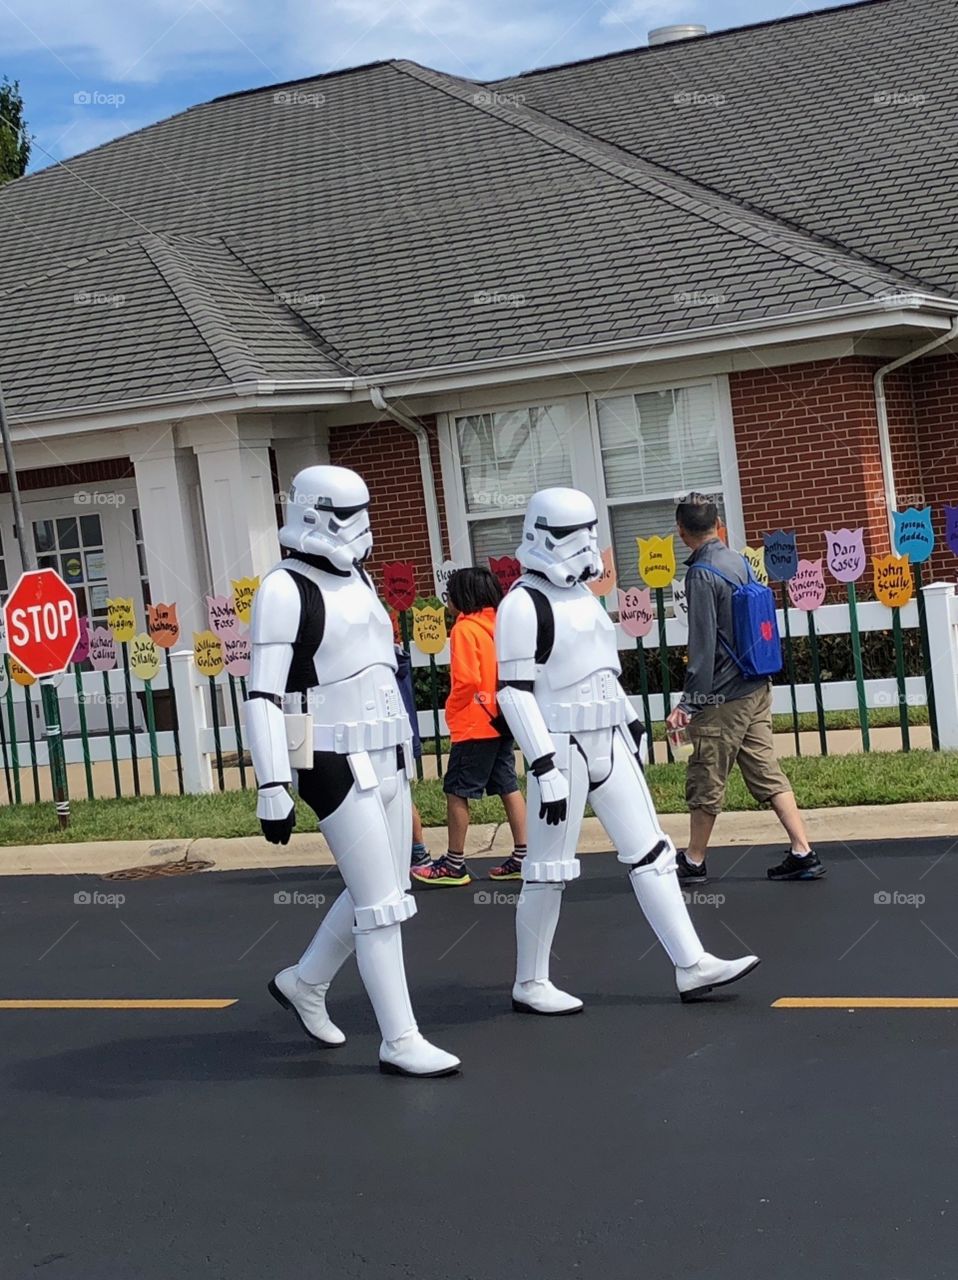 Storm troopers in the area. Photo-of-the-Day
#photooftheday #photo-of-the-day #amateurphotography #stormtroopers